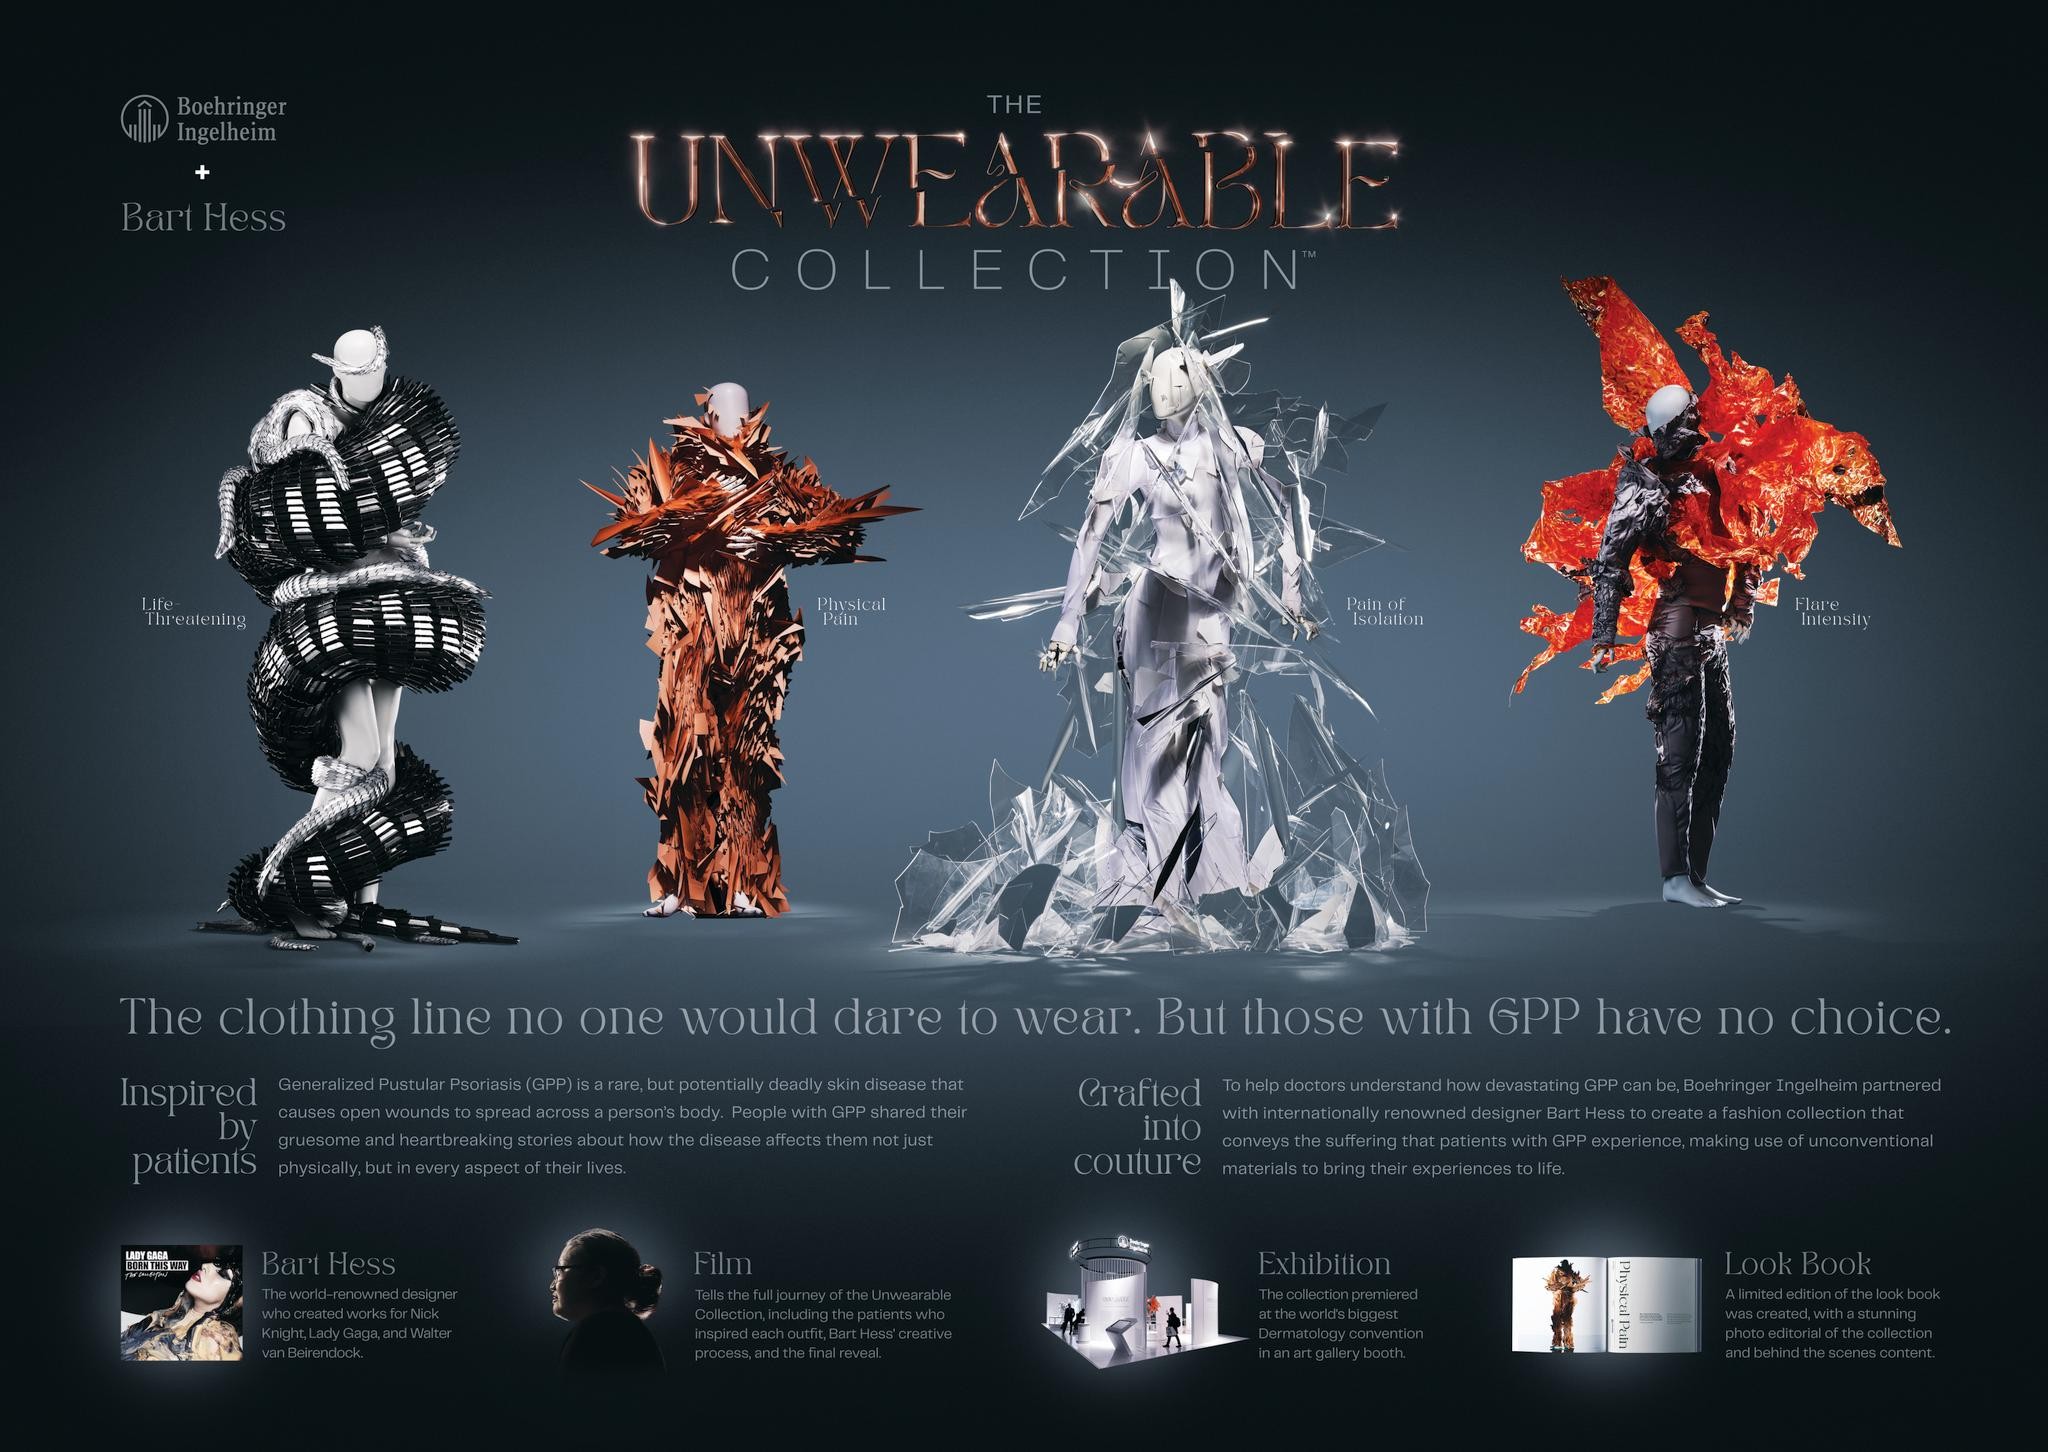 THE UNWEARABLE COLLECTION